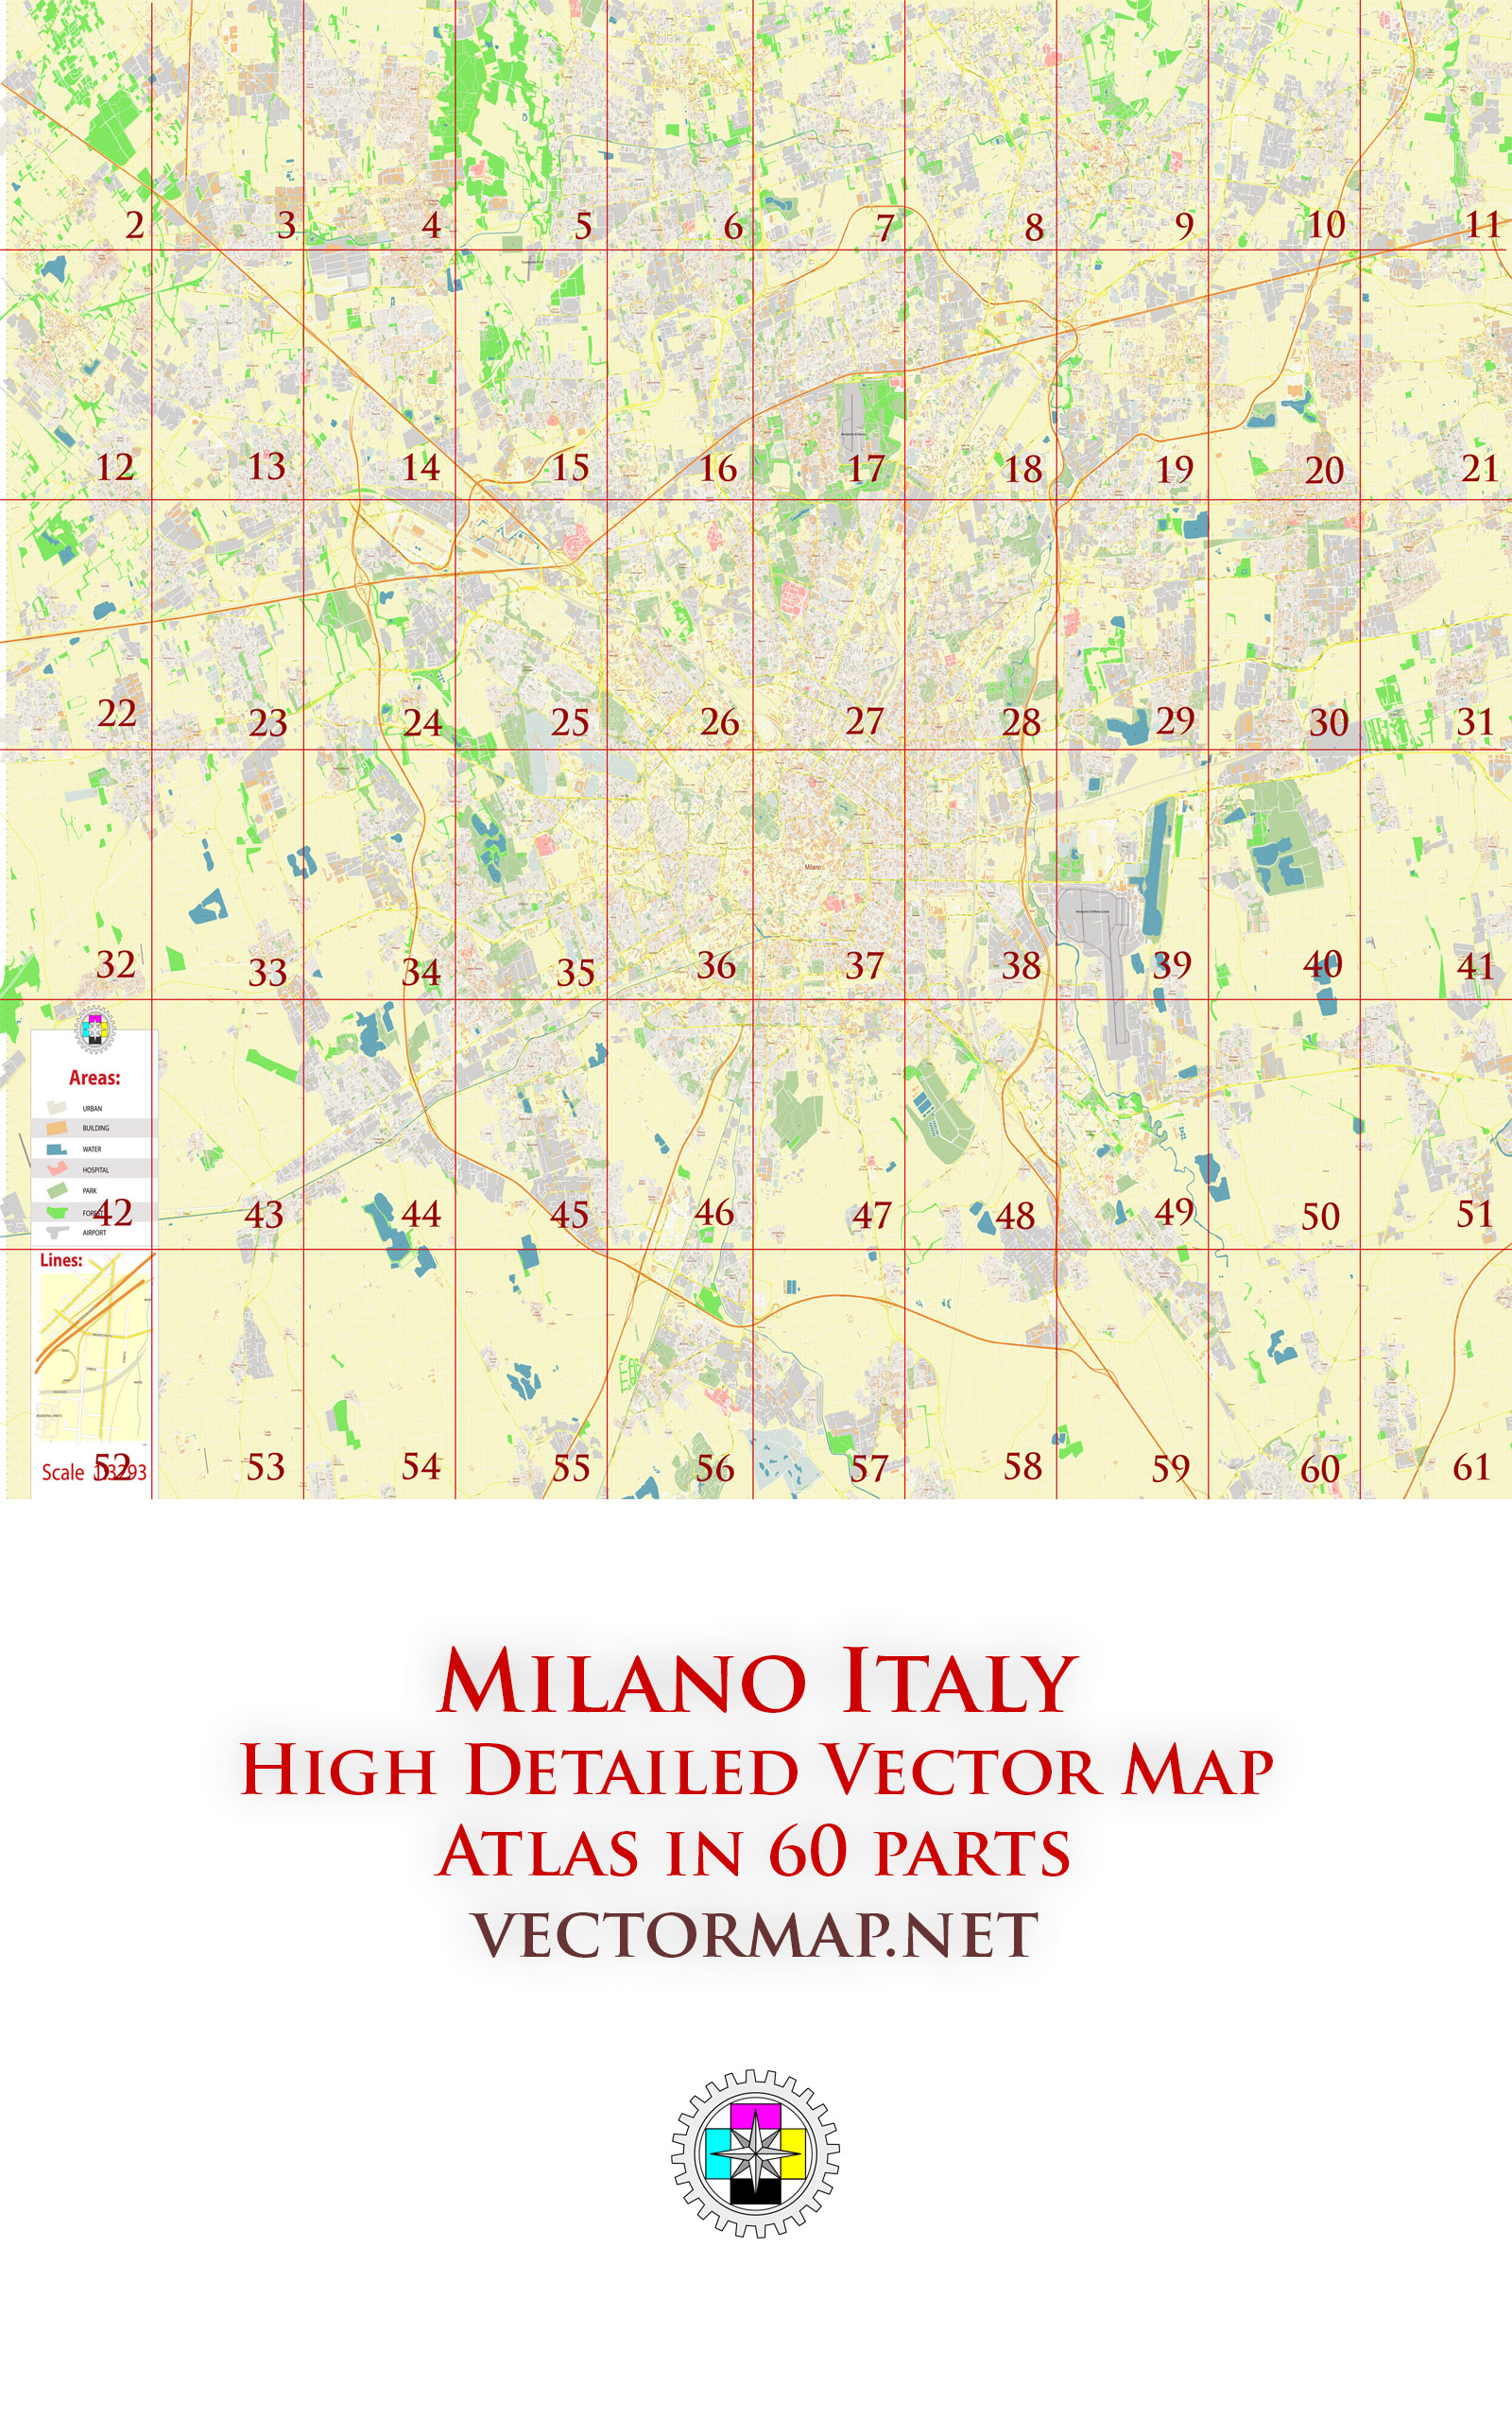 Milano Italy Tourist Map multi-page atlas, contains 60 pages vector PDF